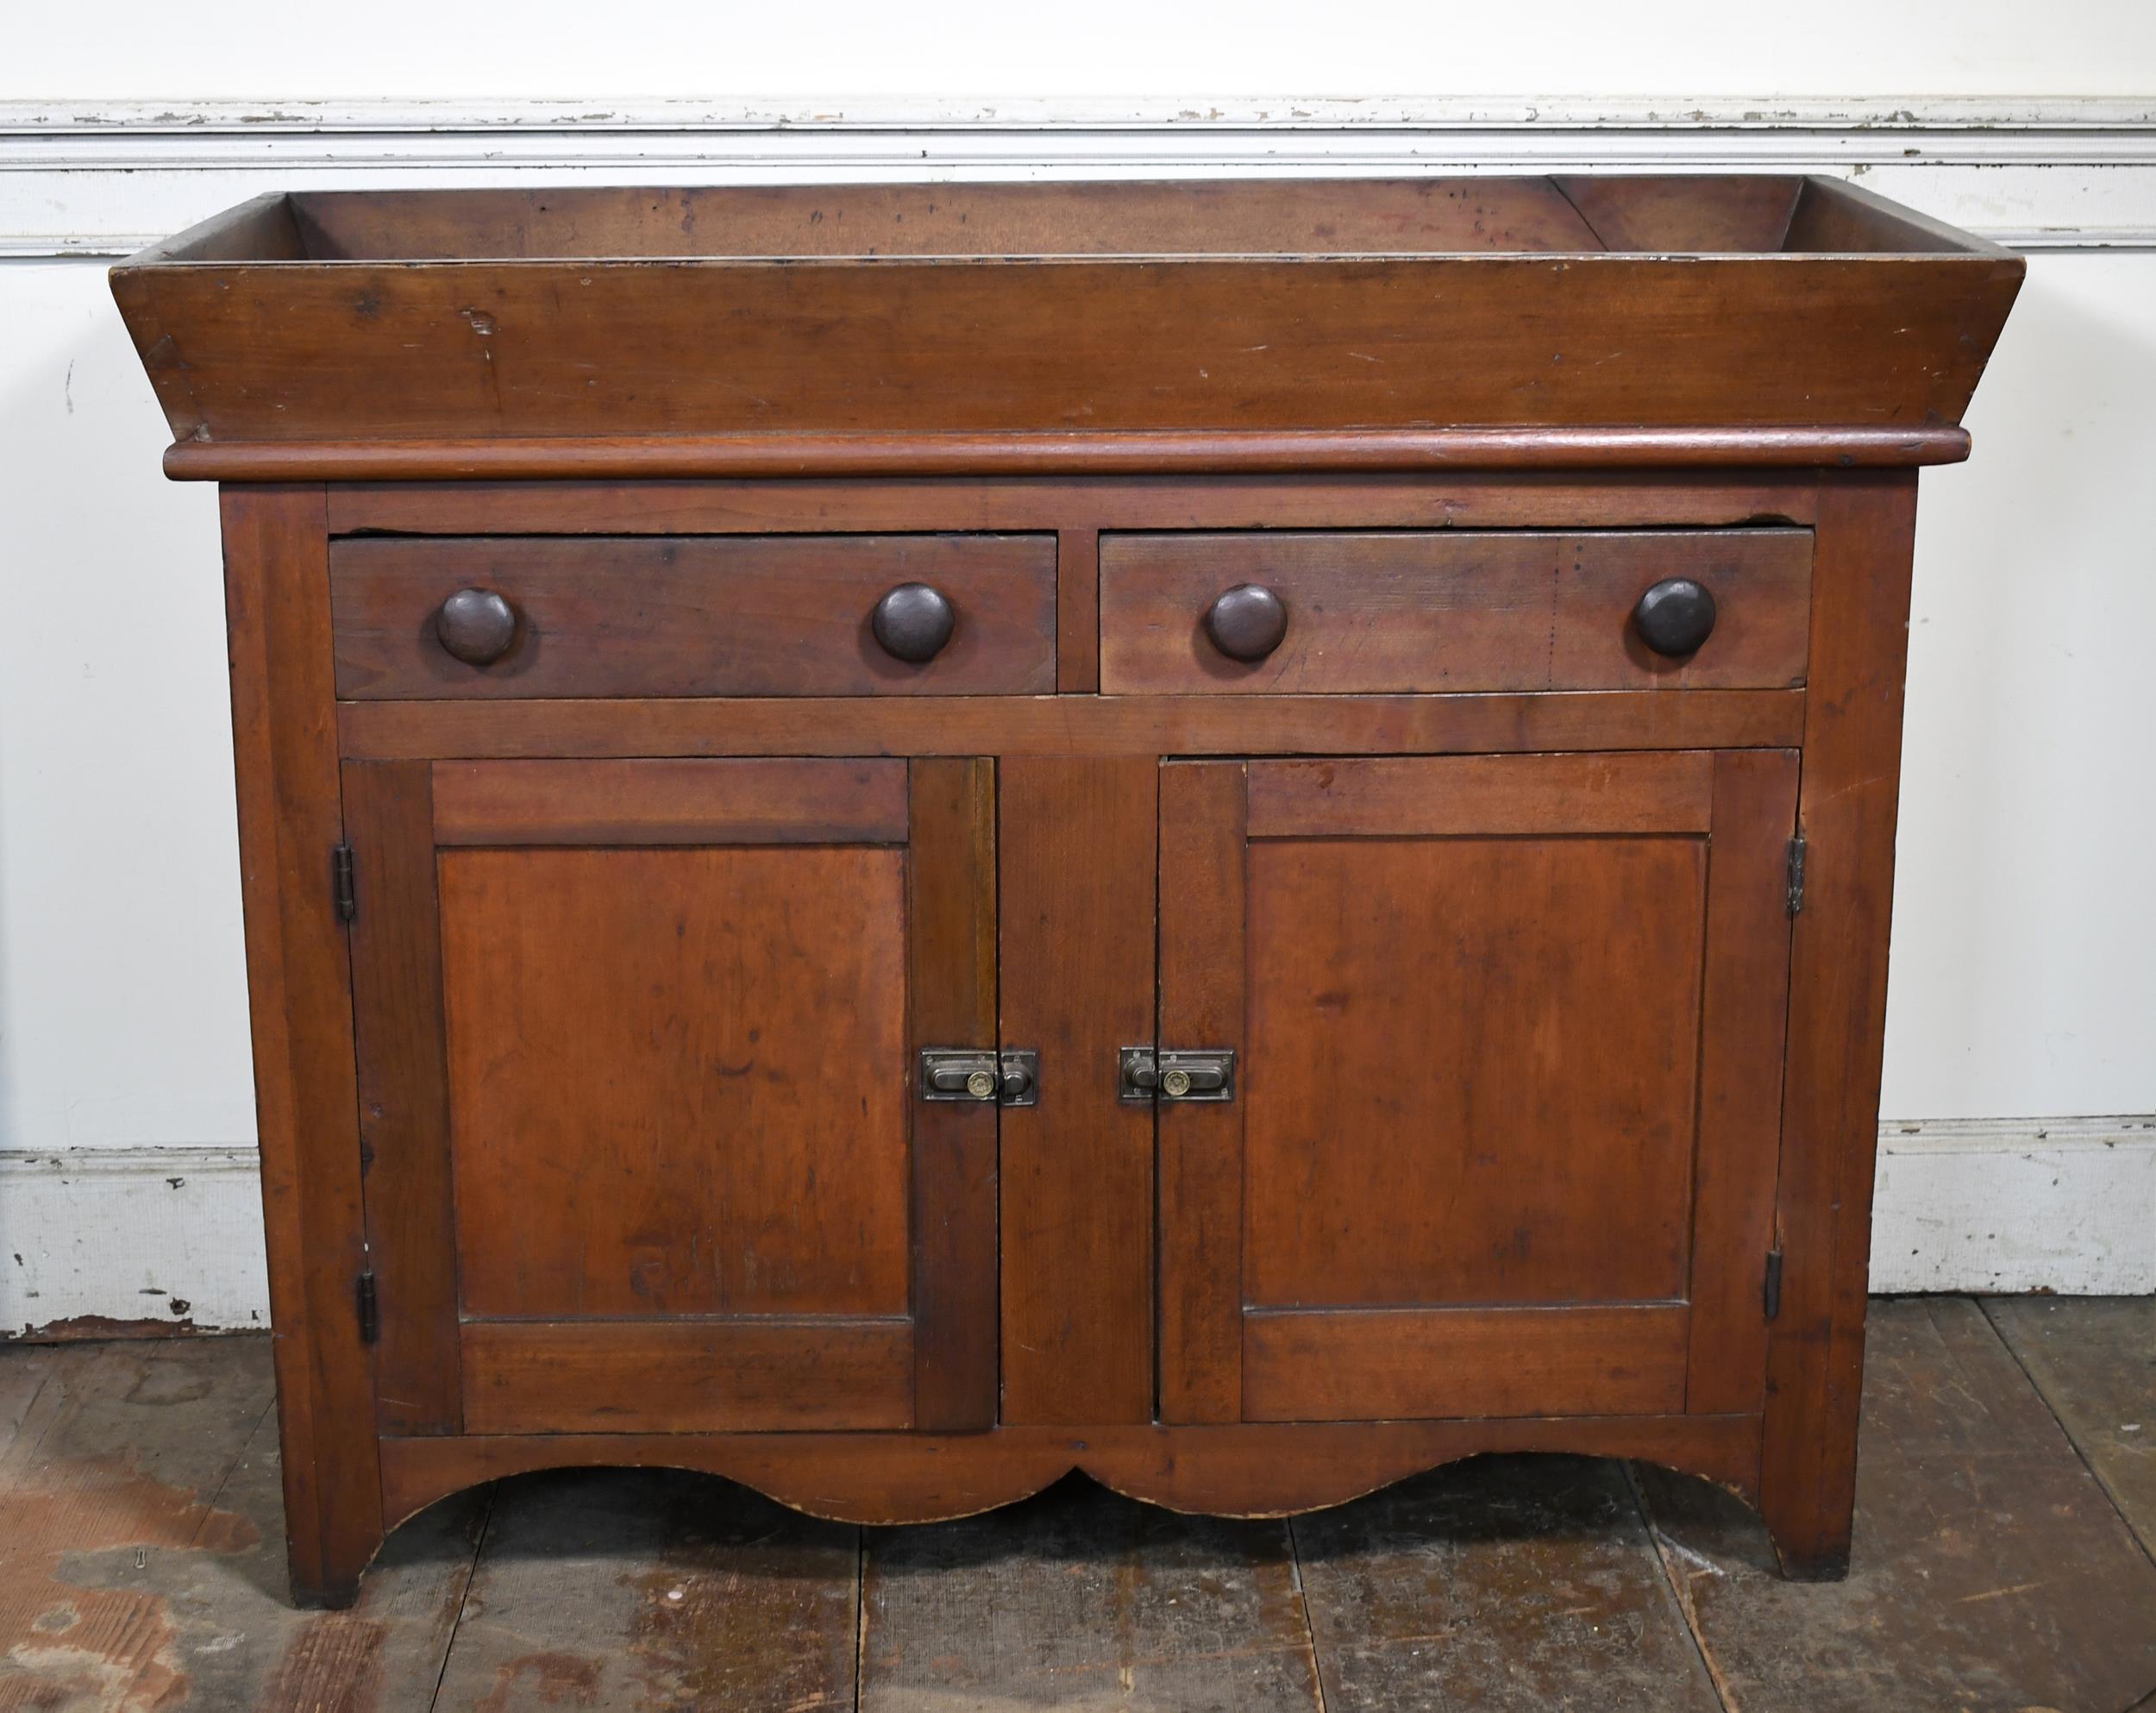 EARLY 19TH C. CHERRY DRY SINK.